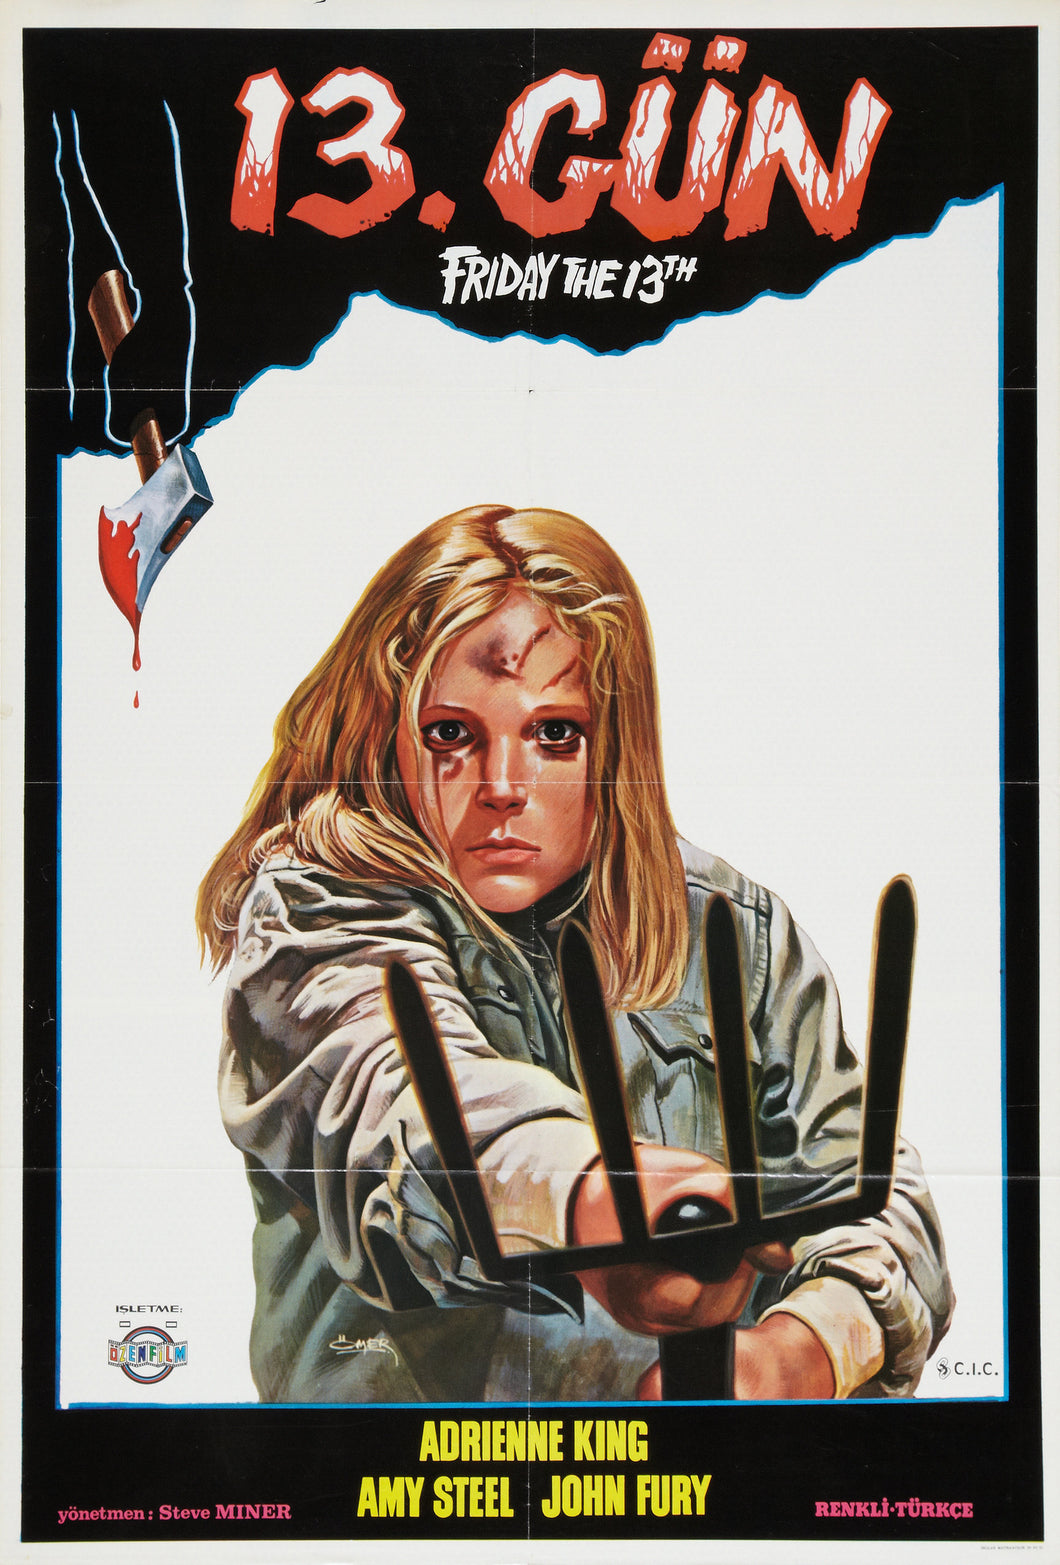 Poster Pelicula Friday the 13th Part 2